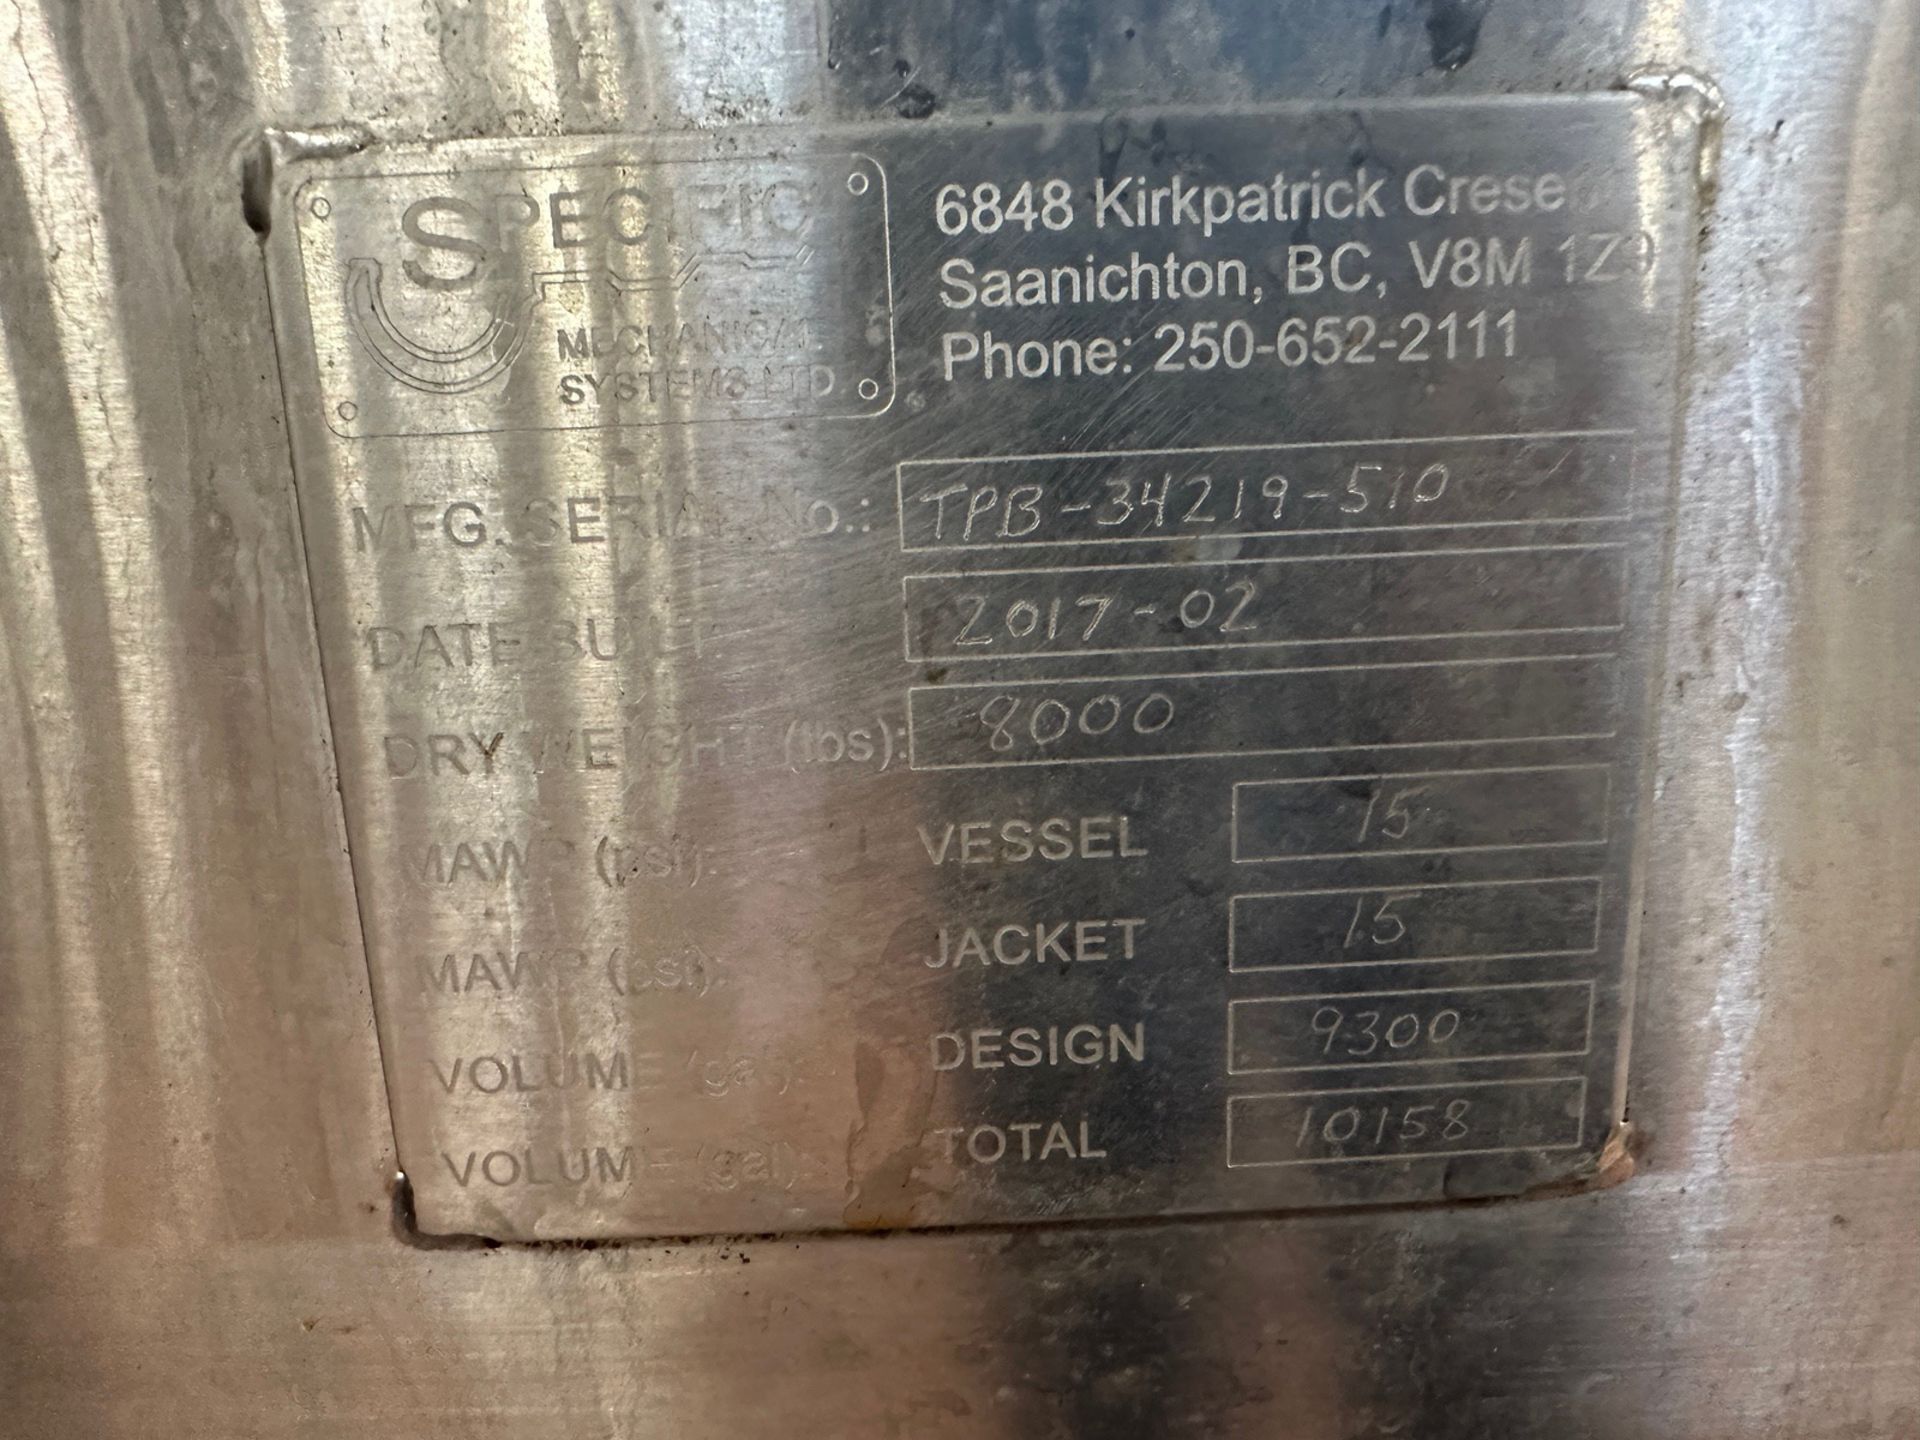 2017 - 300 BBL Specific Mechanical Stainless Steel Brite Tank - Dish Bottom, Glycol | Rig Fee $1550 - Image 8 of 8